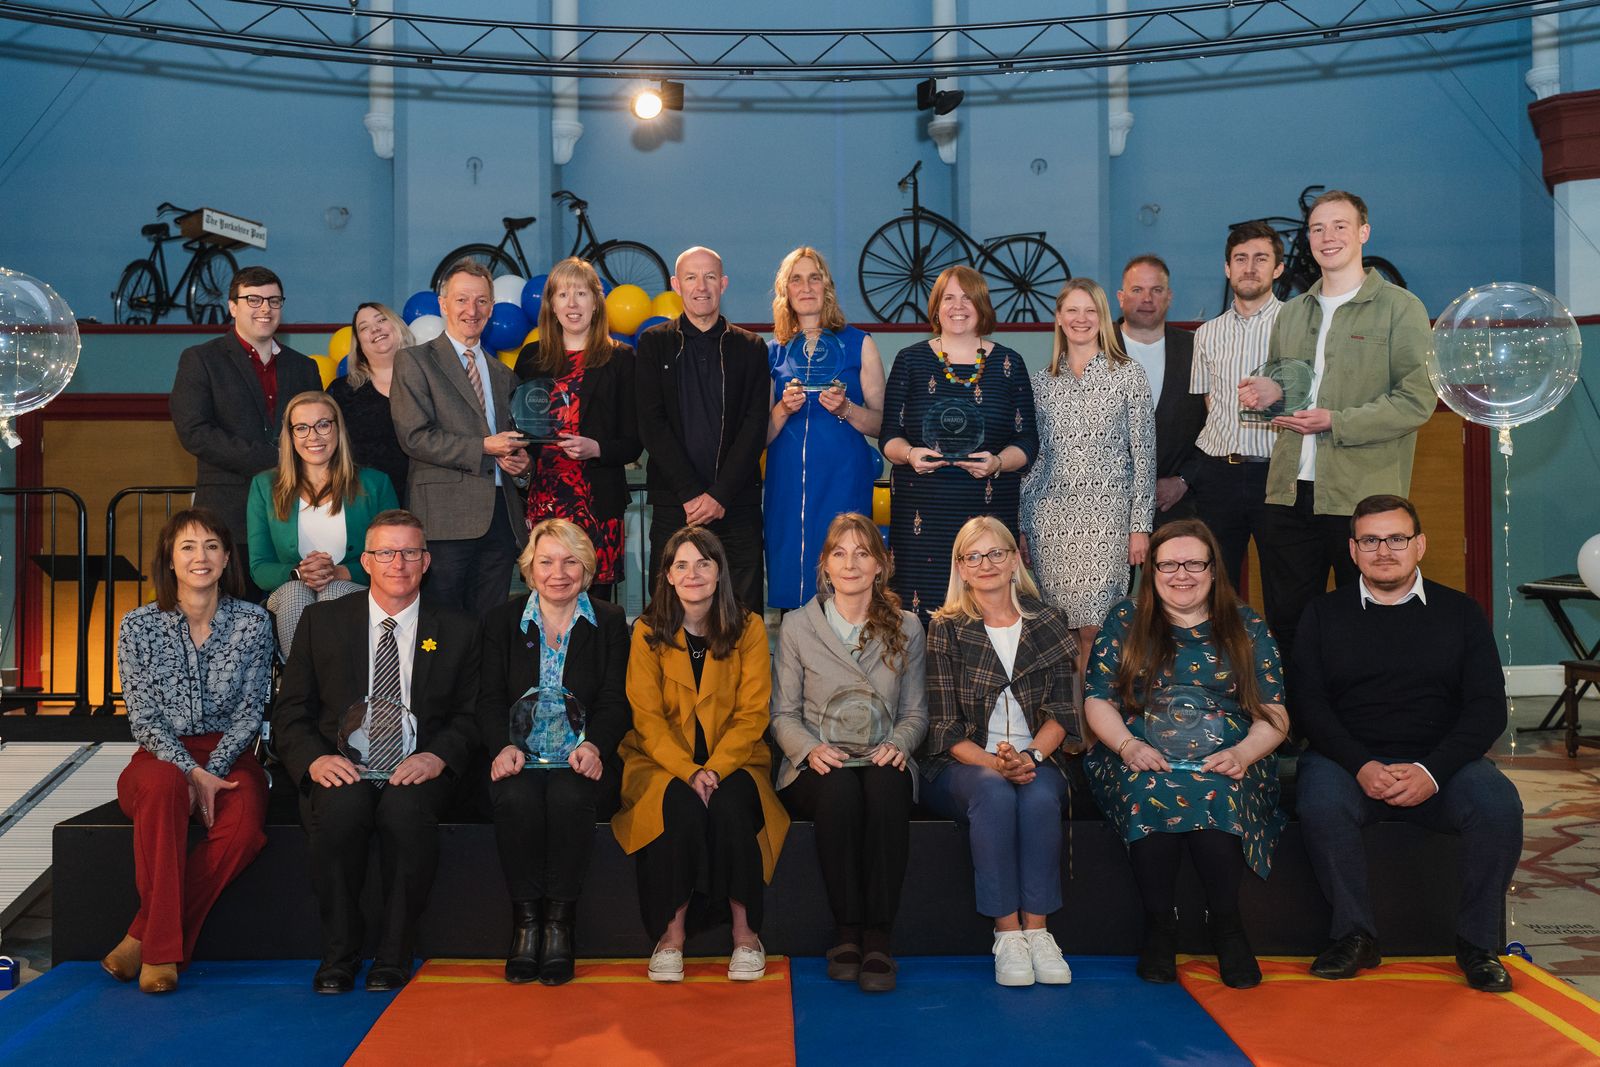 Winners celebrated at inaugural Sporting Heritage Awards